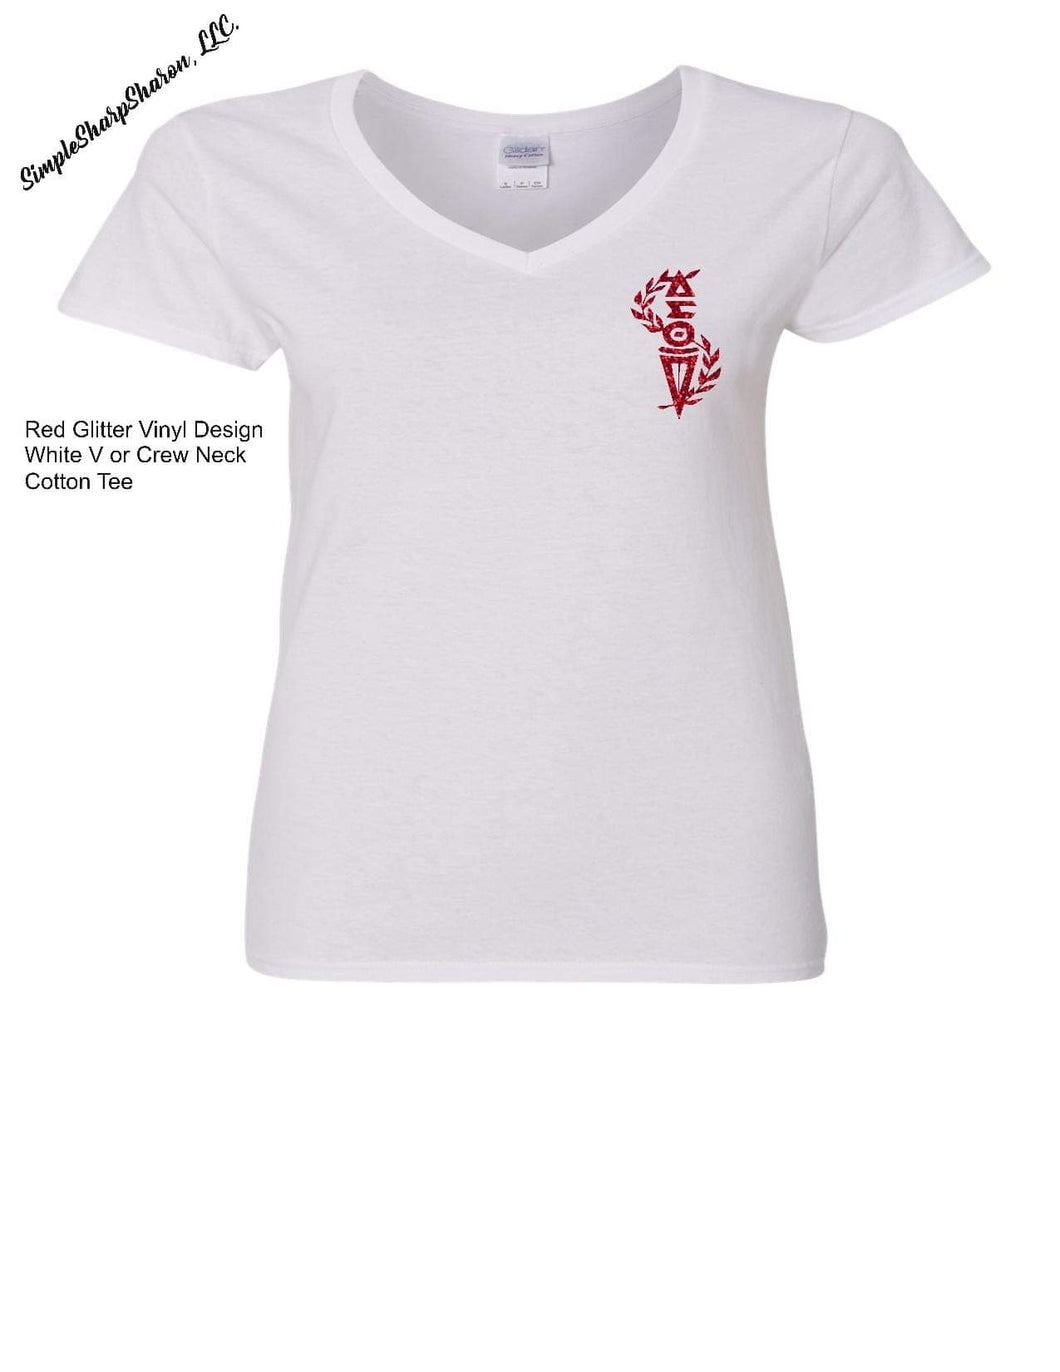 White Tee with DST Torch of Wisdom Design